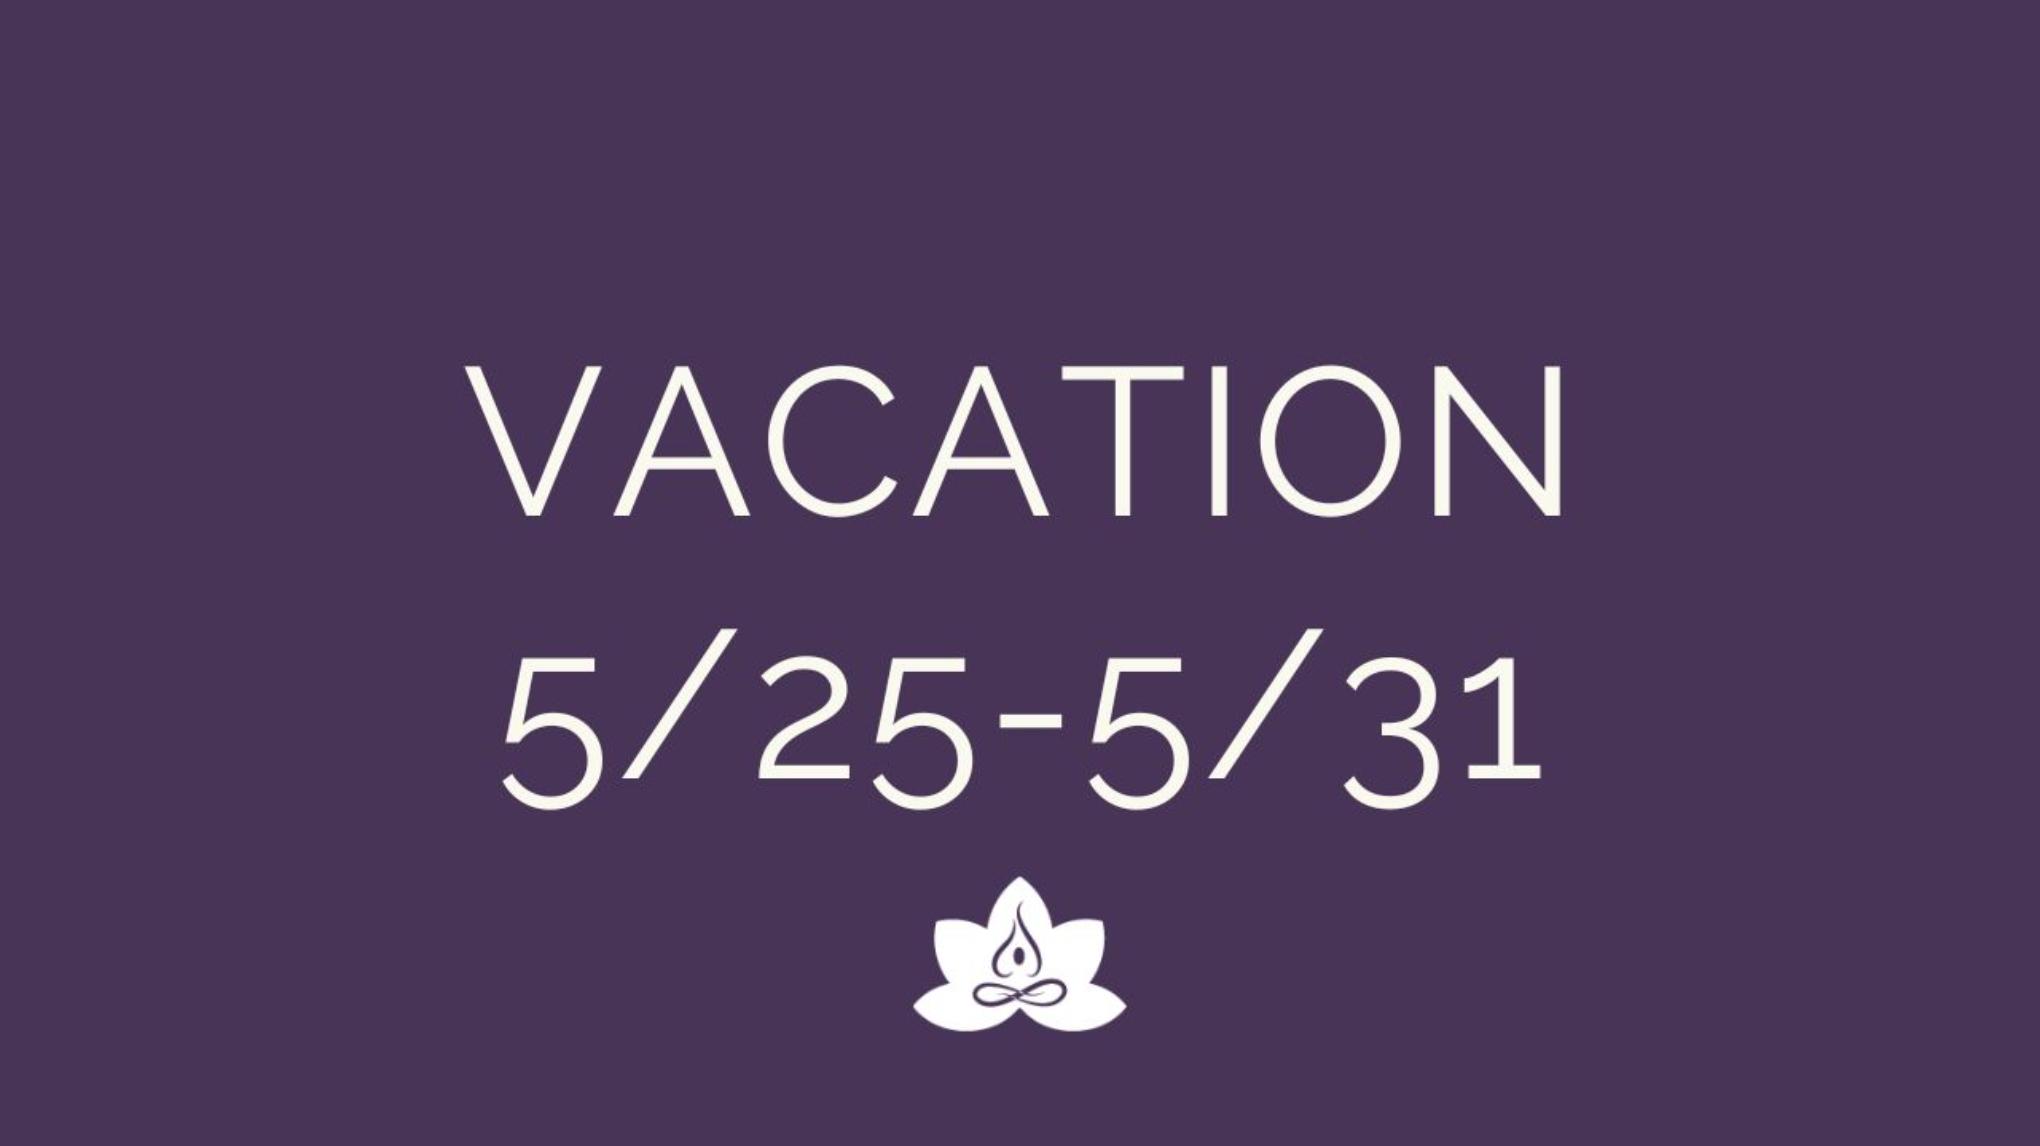 Deb will be on vacation from May 25th through May 31st